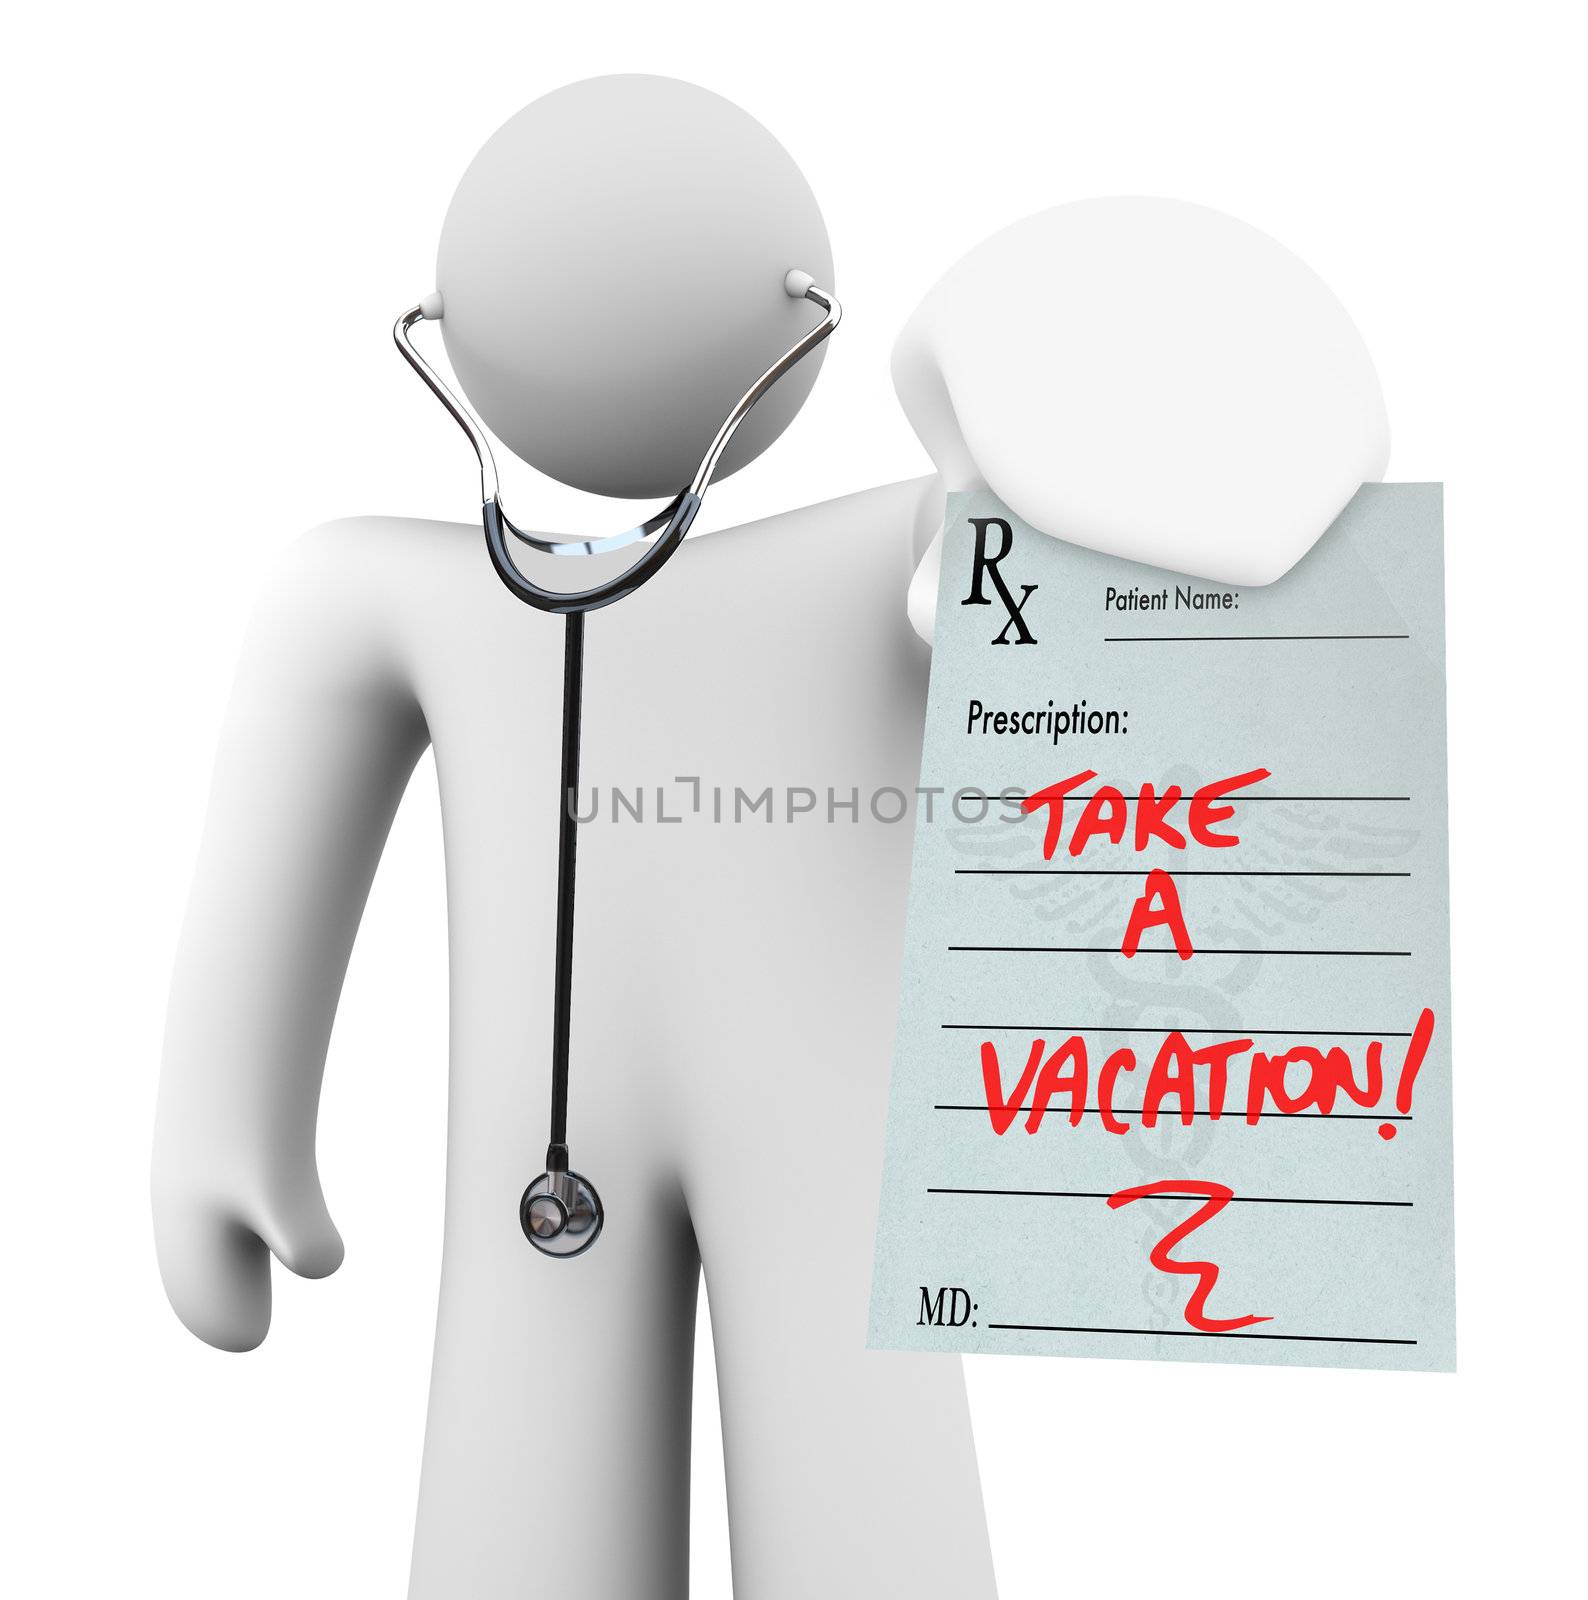 A doctor holds a prescription with the words Take a Vacation written on it, symbolizing the need to reduce stress and improve your health by taking a break and enjoying time off to rejuvenate